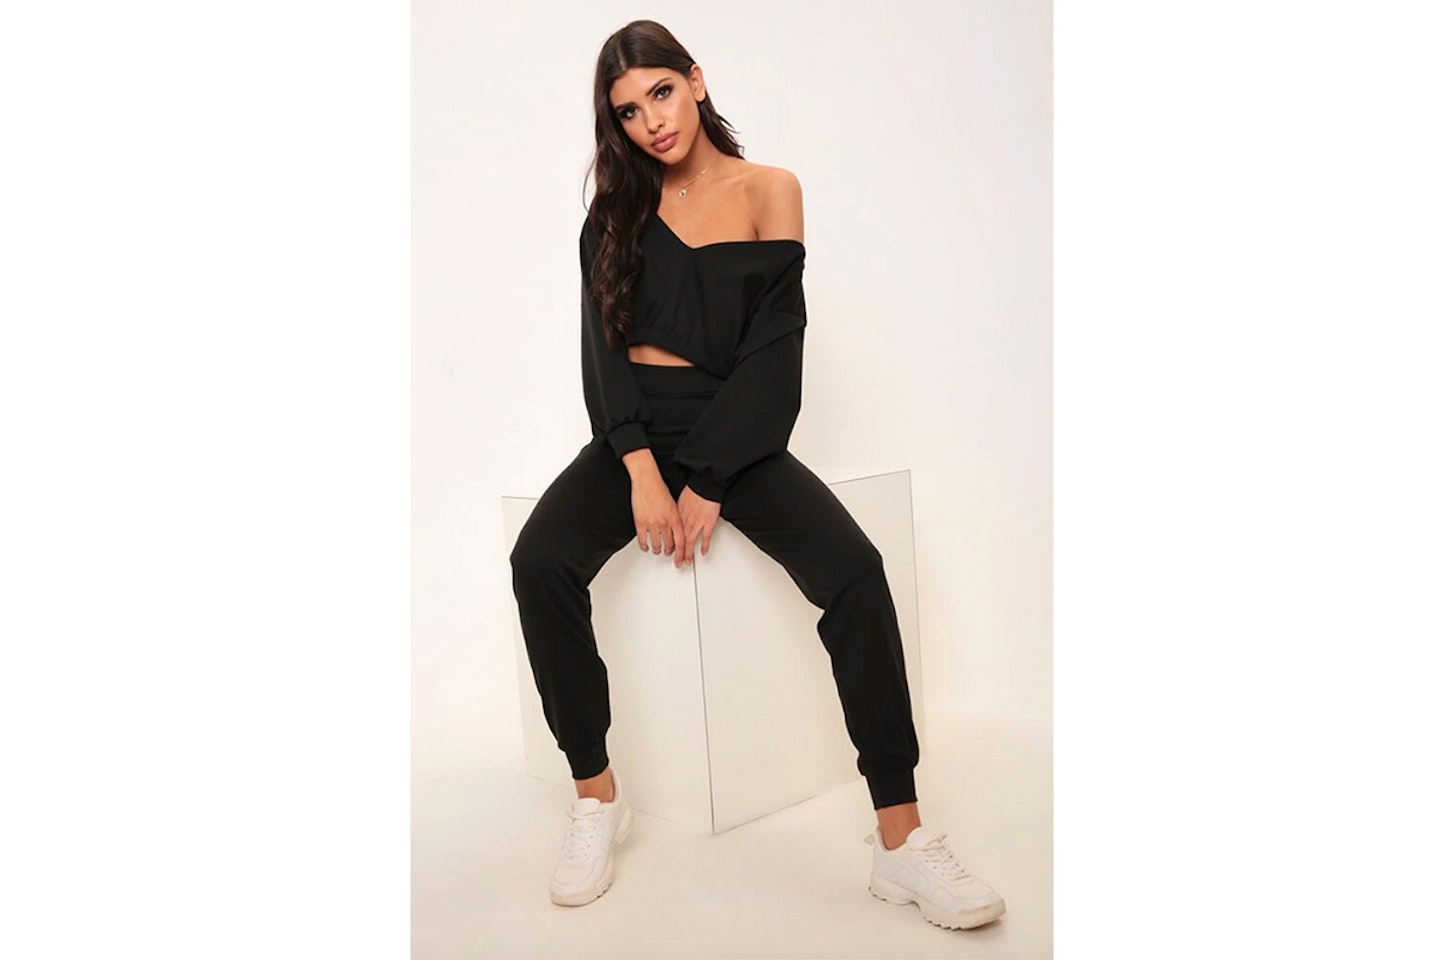 HURRY! 99p DELIVERY  ENDS SOON   Watch Video Long Sleeve V-Neck Lounge Set